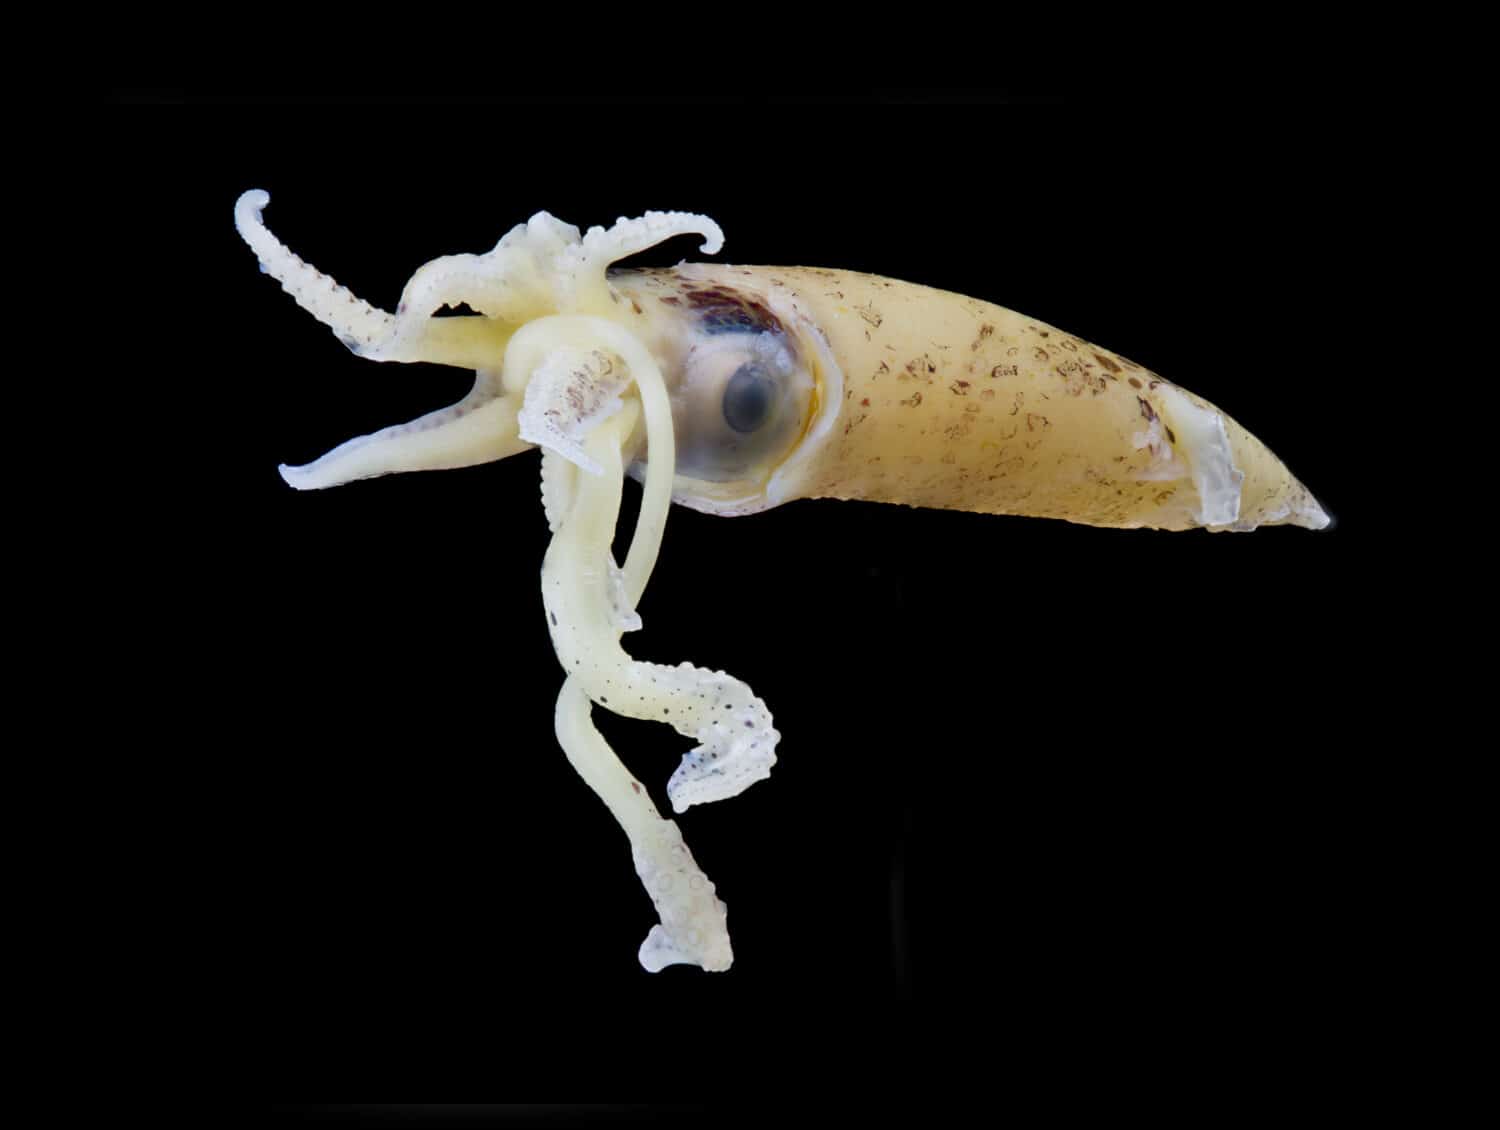 Preserved scientific juvenile squid specimen, collected from Bournemouth coastline, Southern England. Isolated on black.